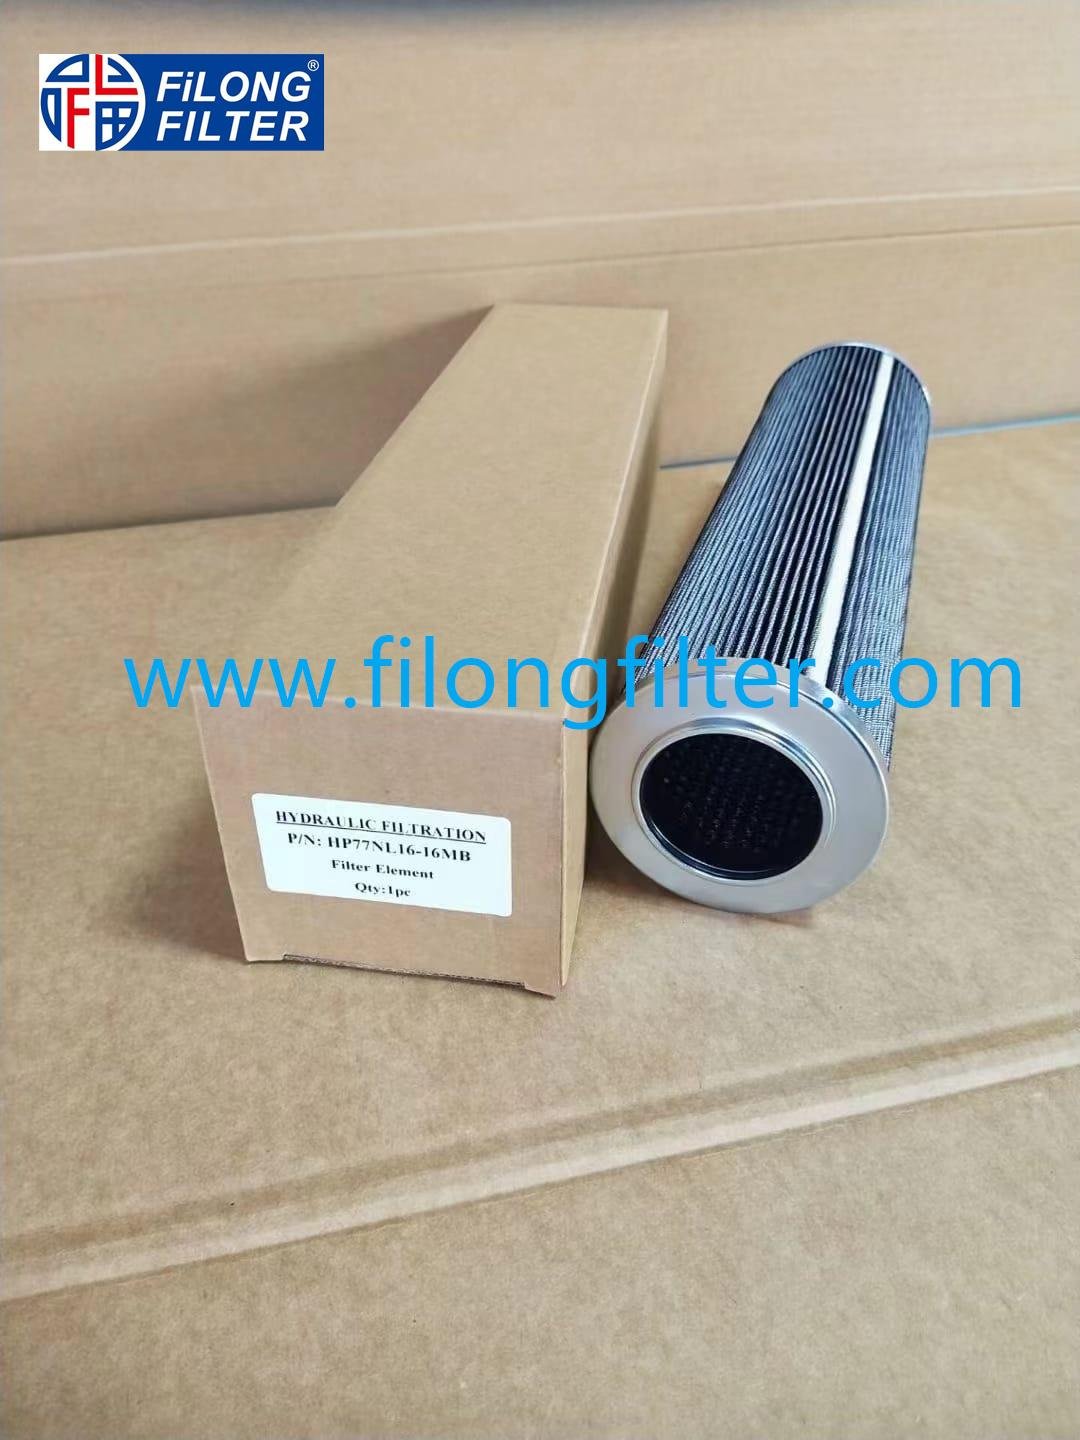 HP77NL16-16MB ,CHINA HYDRAULIC FILTER Manufacturer  ,CHINA HYDRAULIC FILTER Factory, China HYDRAULIC FILTER SUPPLIER